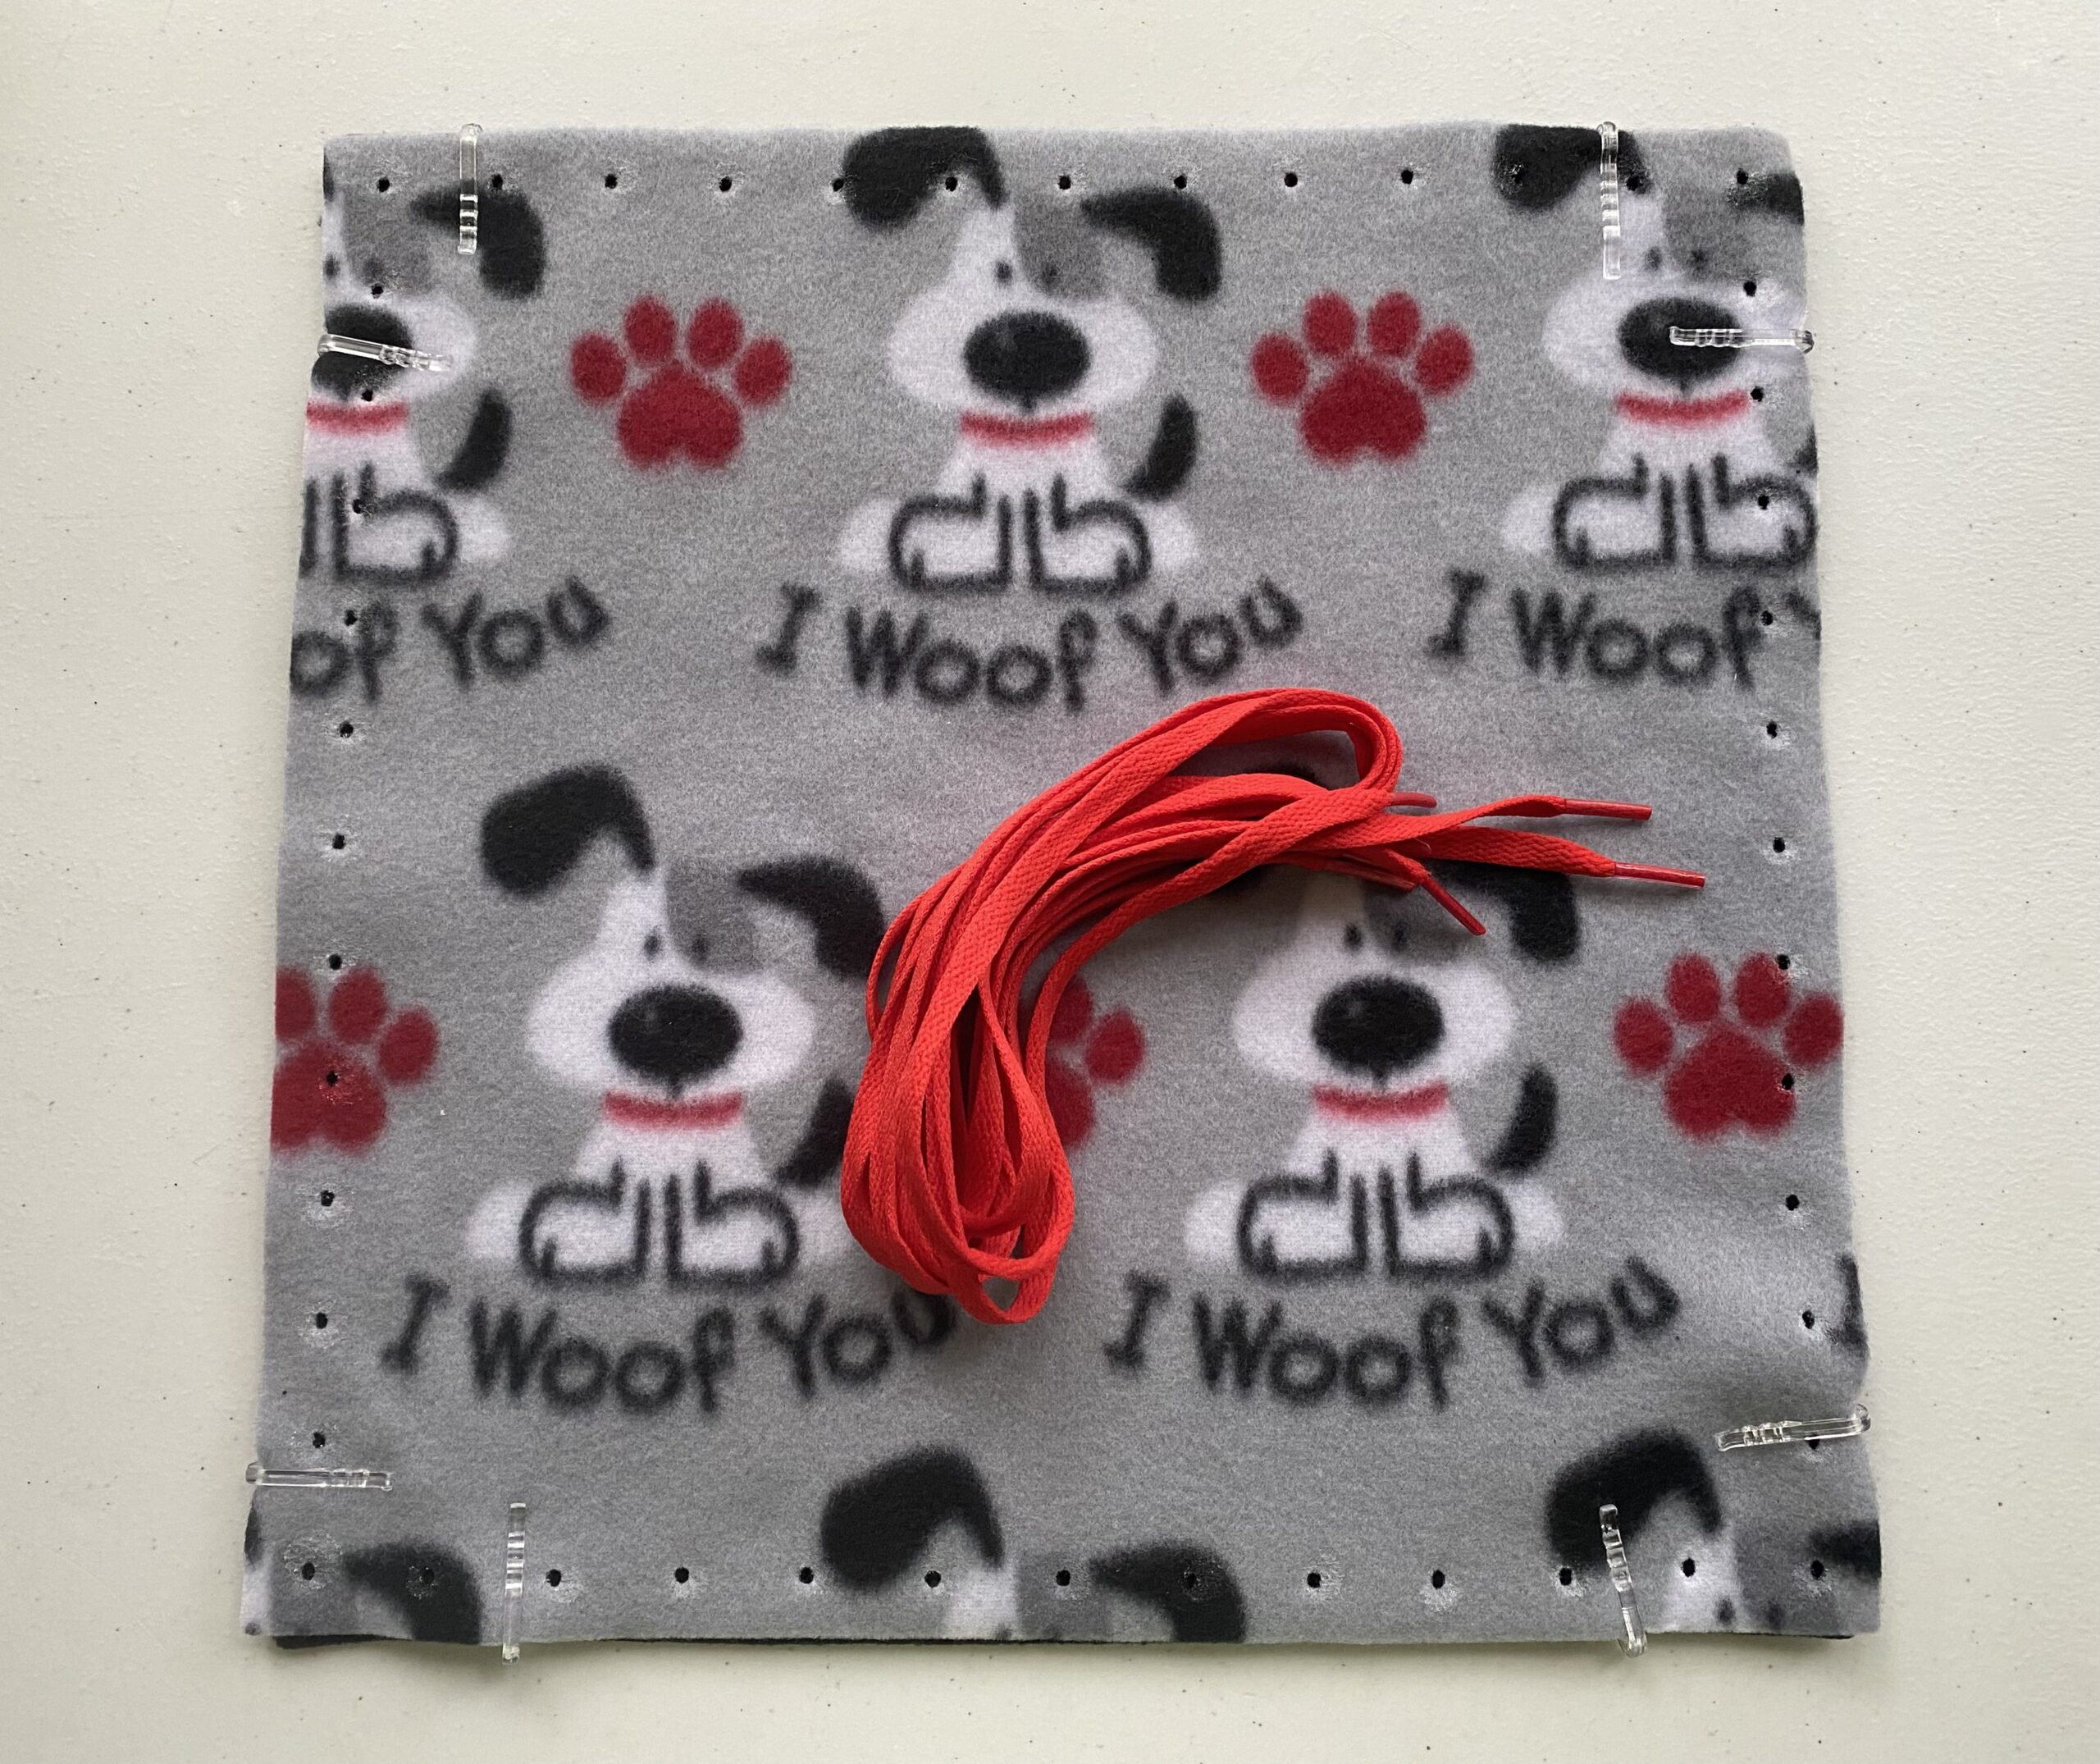 I woof you fleece pillow case kit with shoe laces no insert